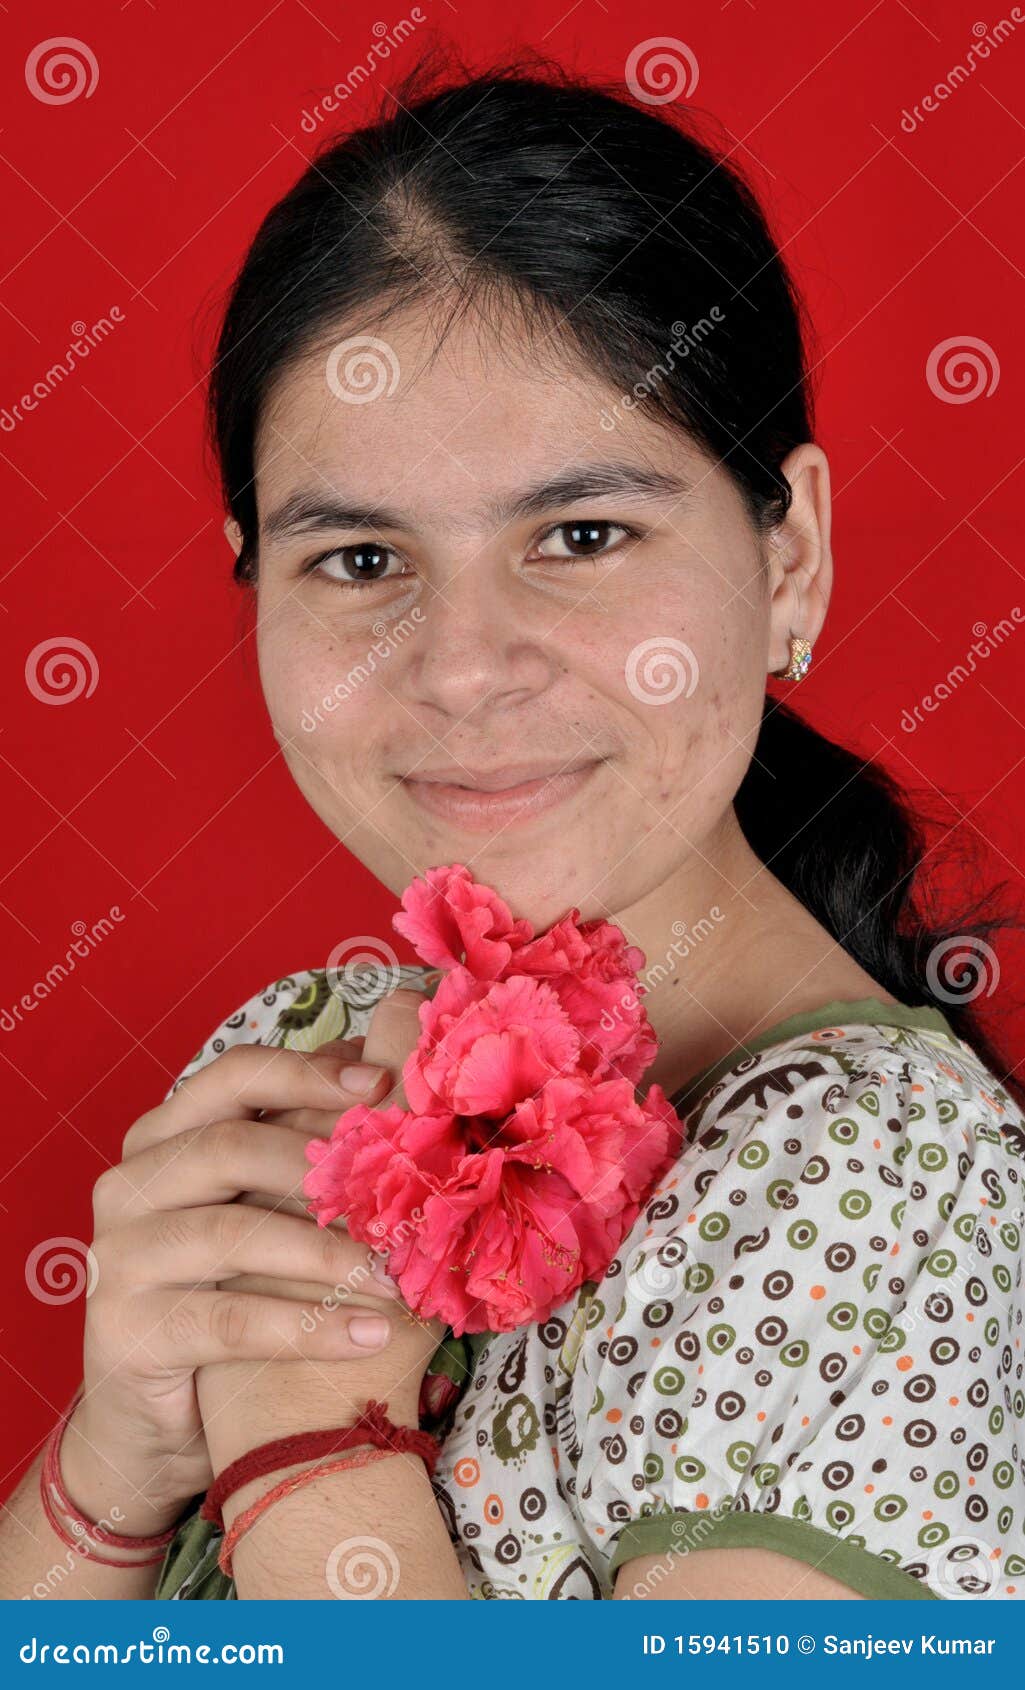 pimple girl with flower